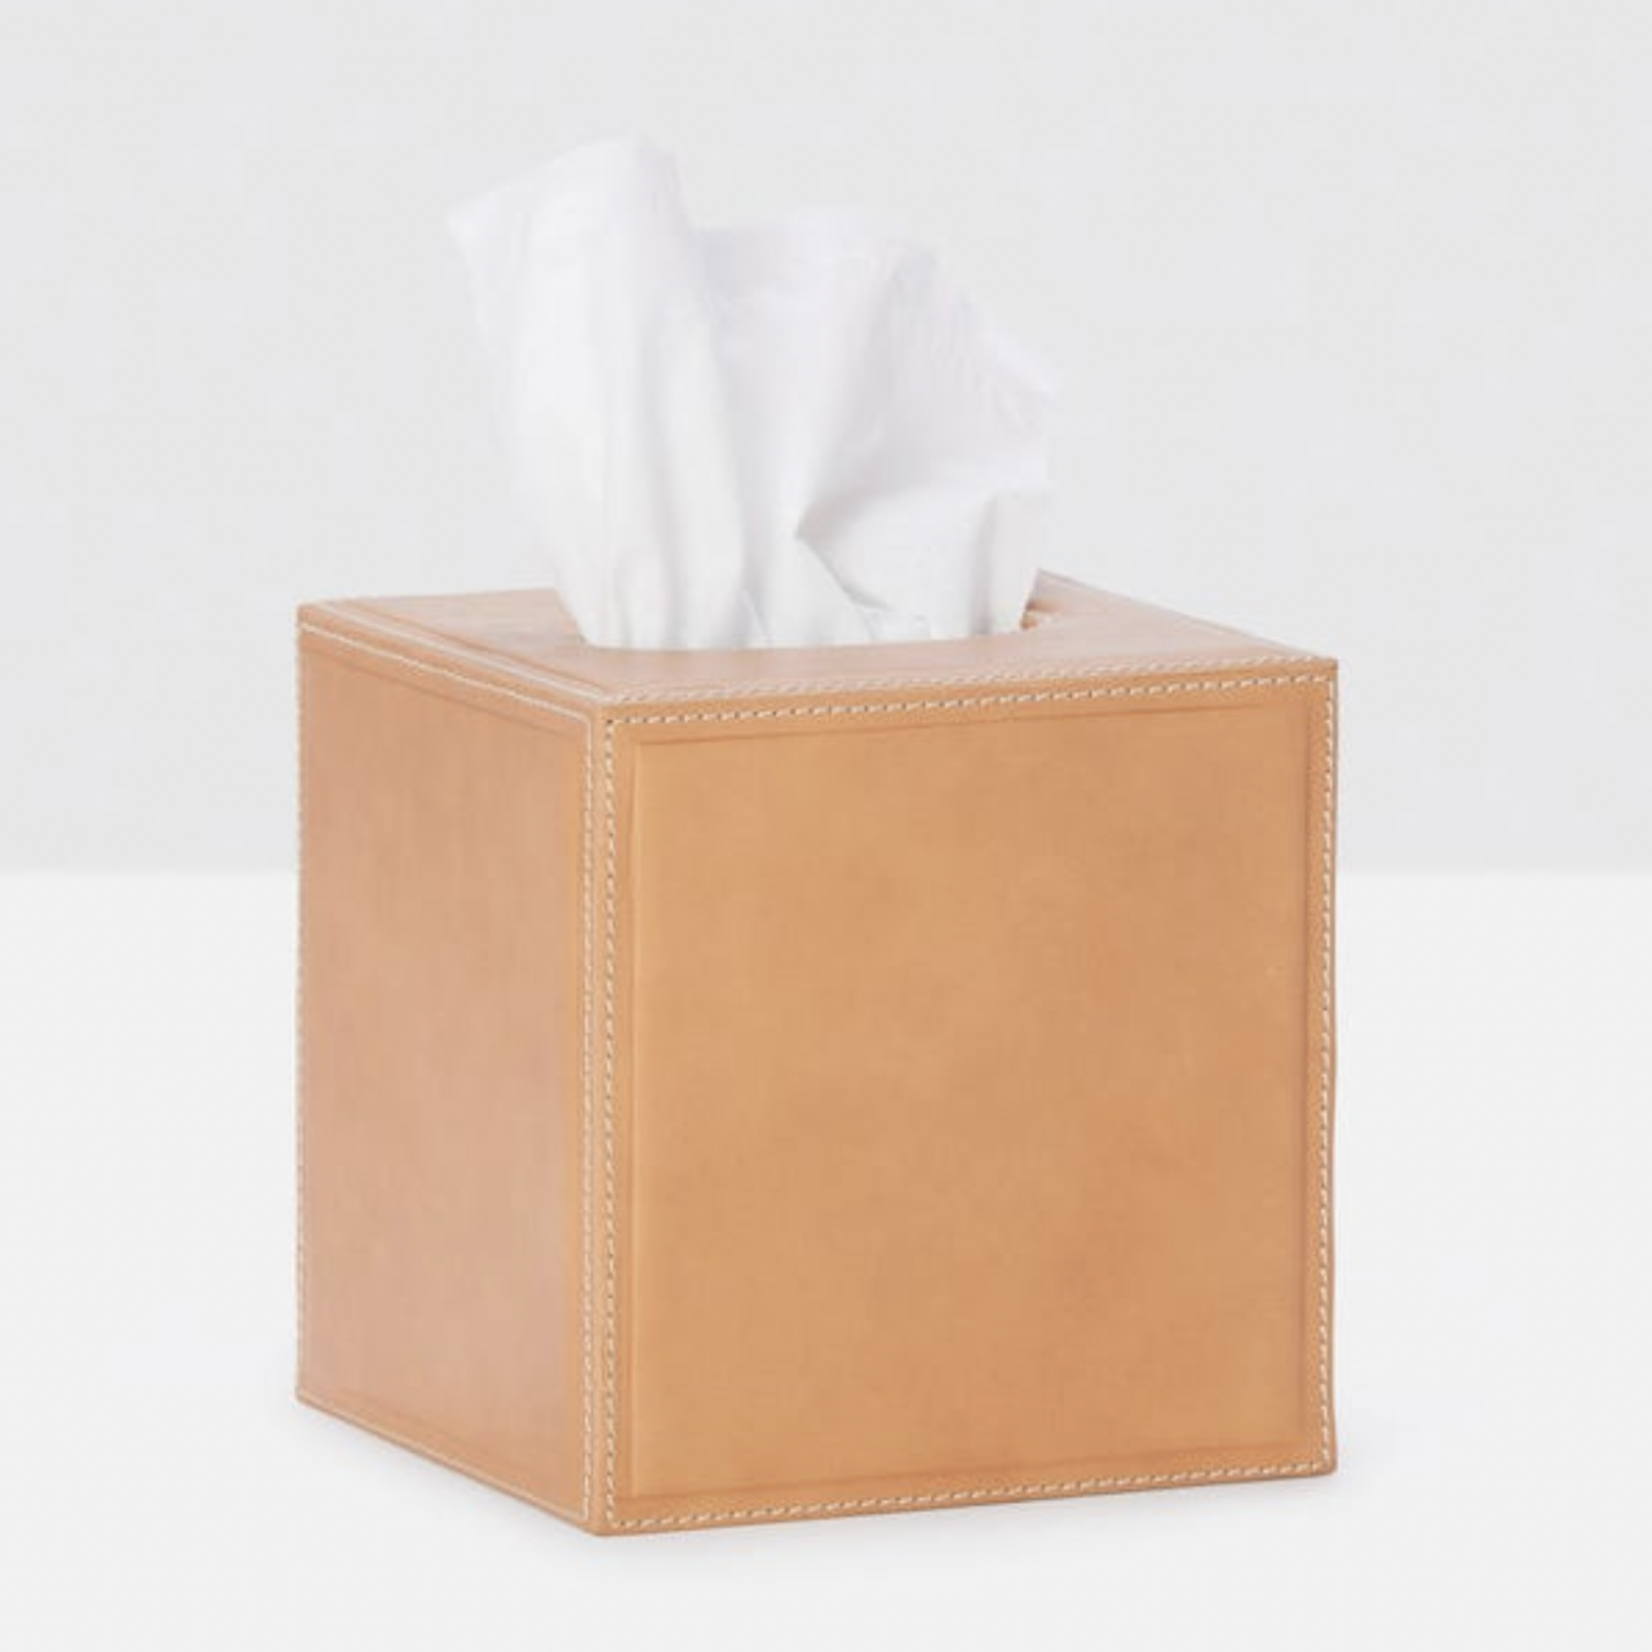 Lorient, Square Tissue Box, Aged Camel Full-Grain Leather